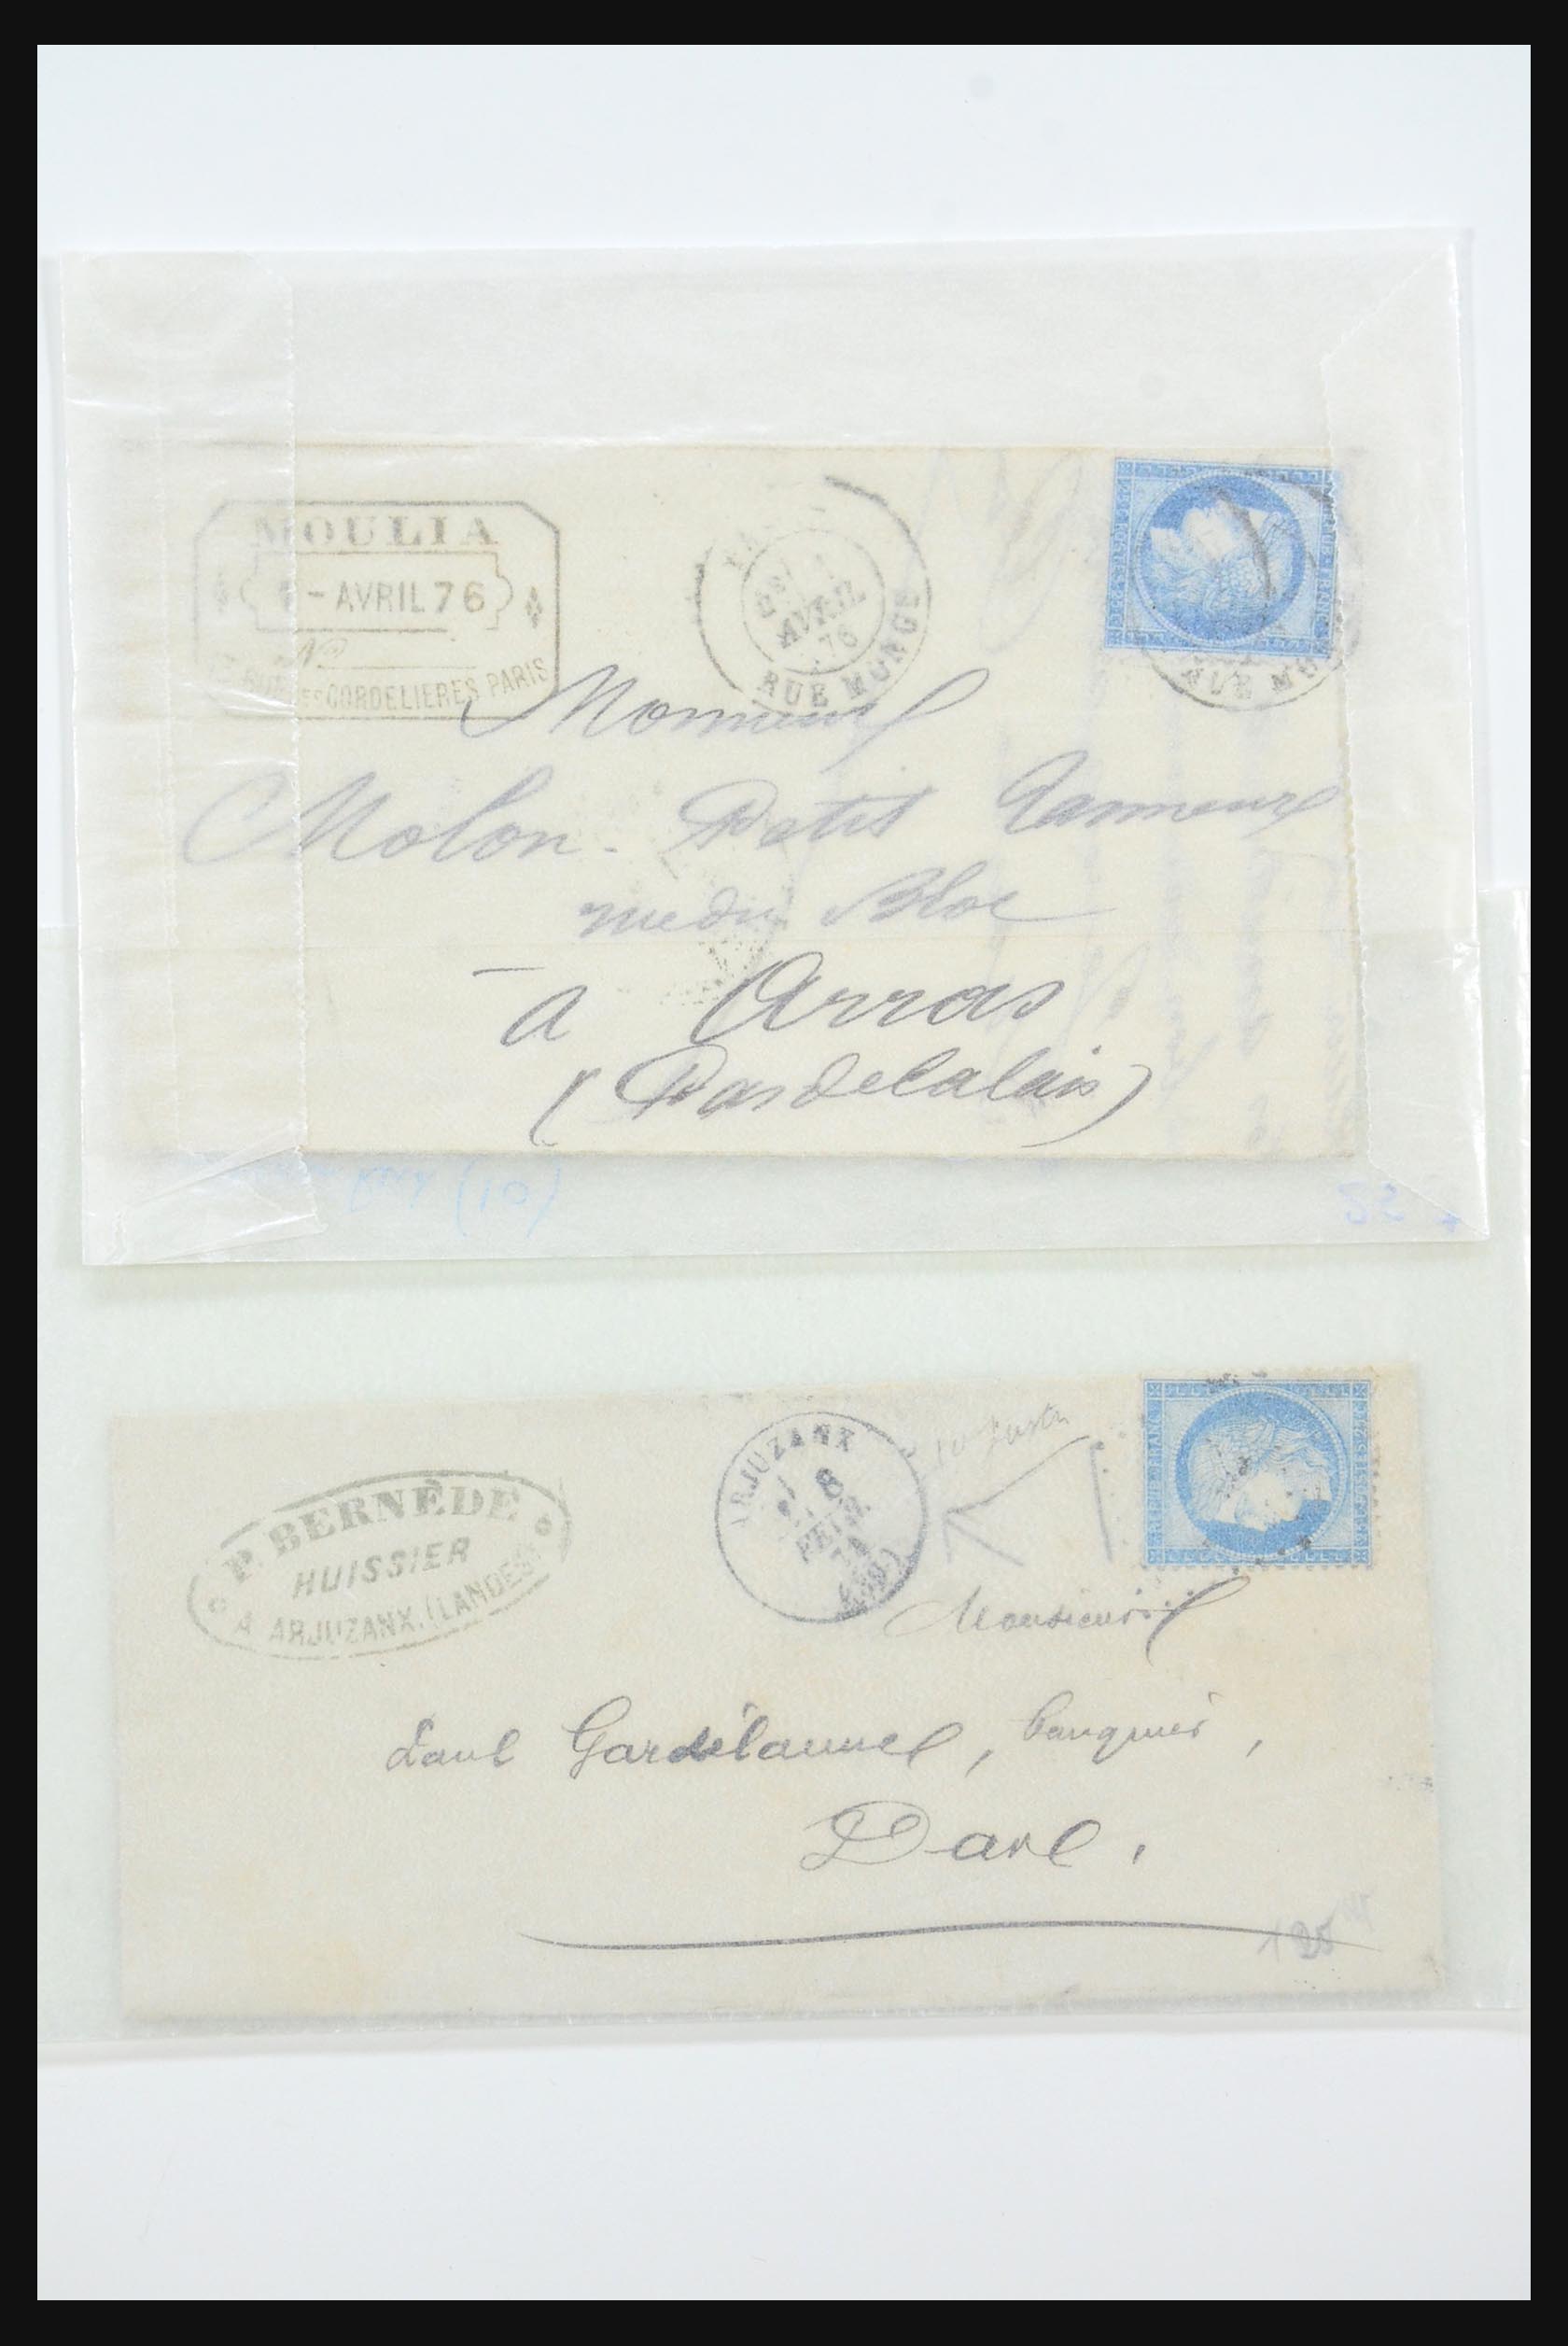 31359 0026 - 31359 France and Colonies covers 1770-1960.